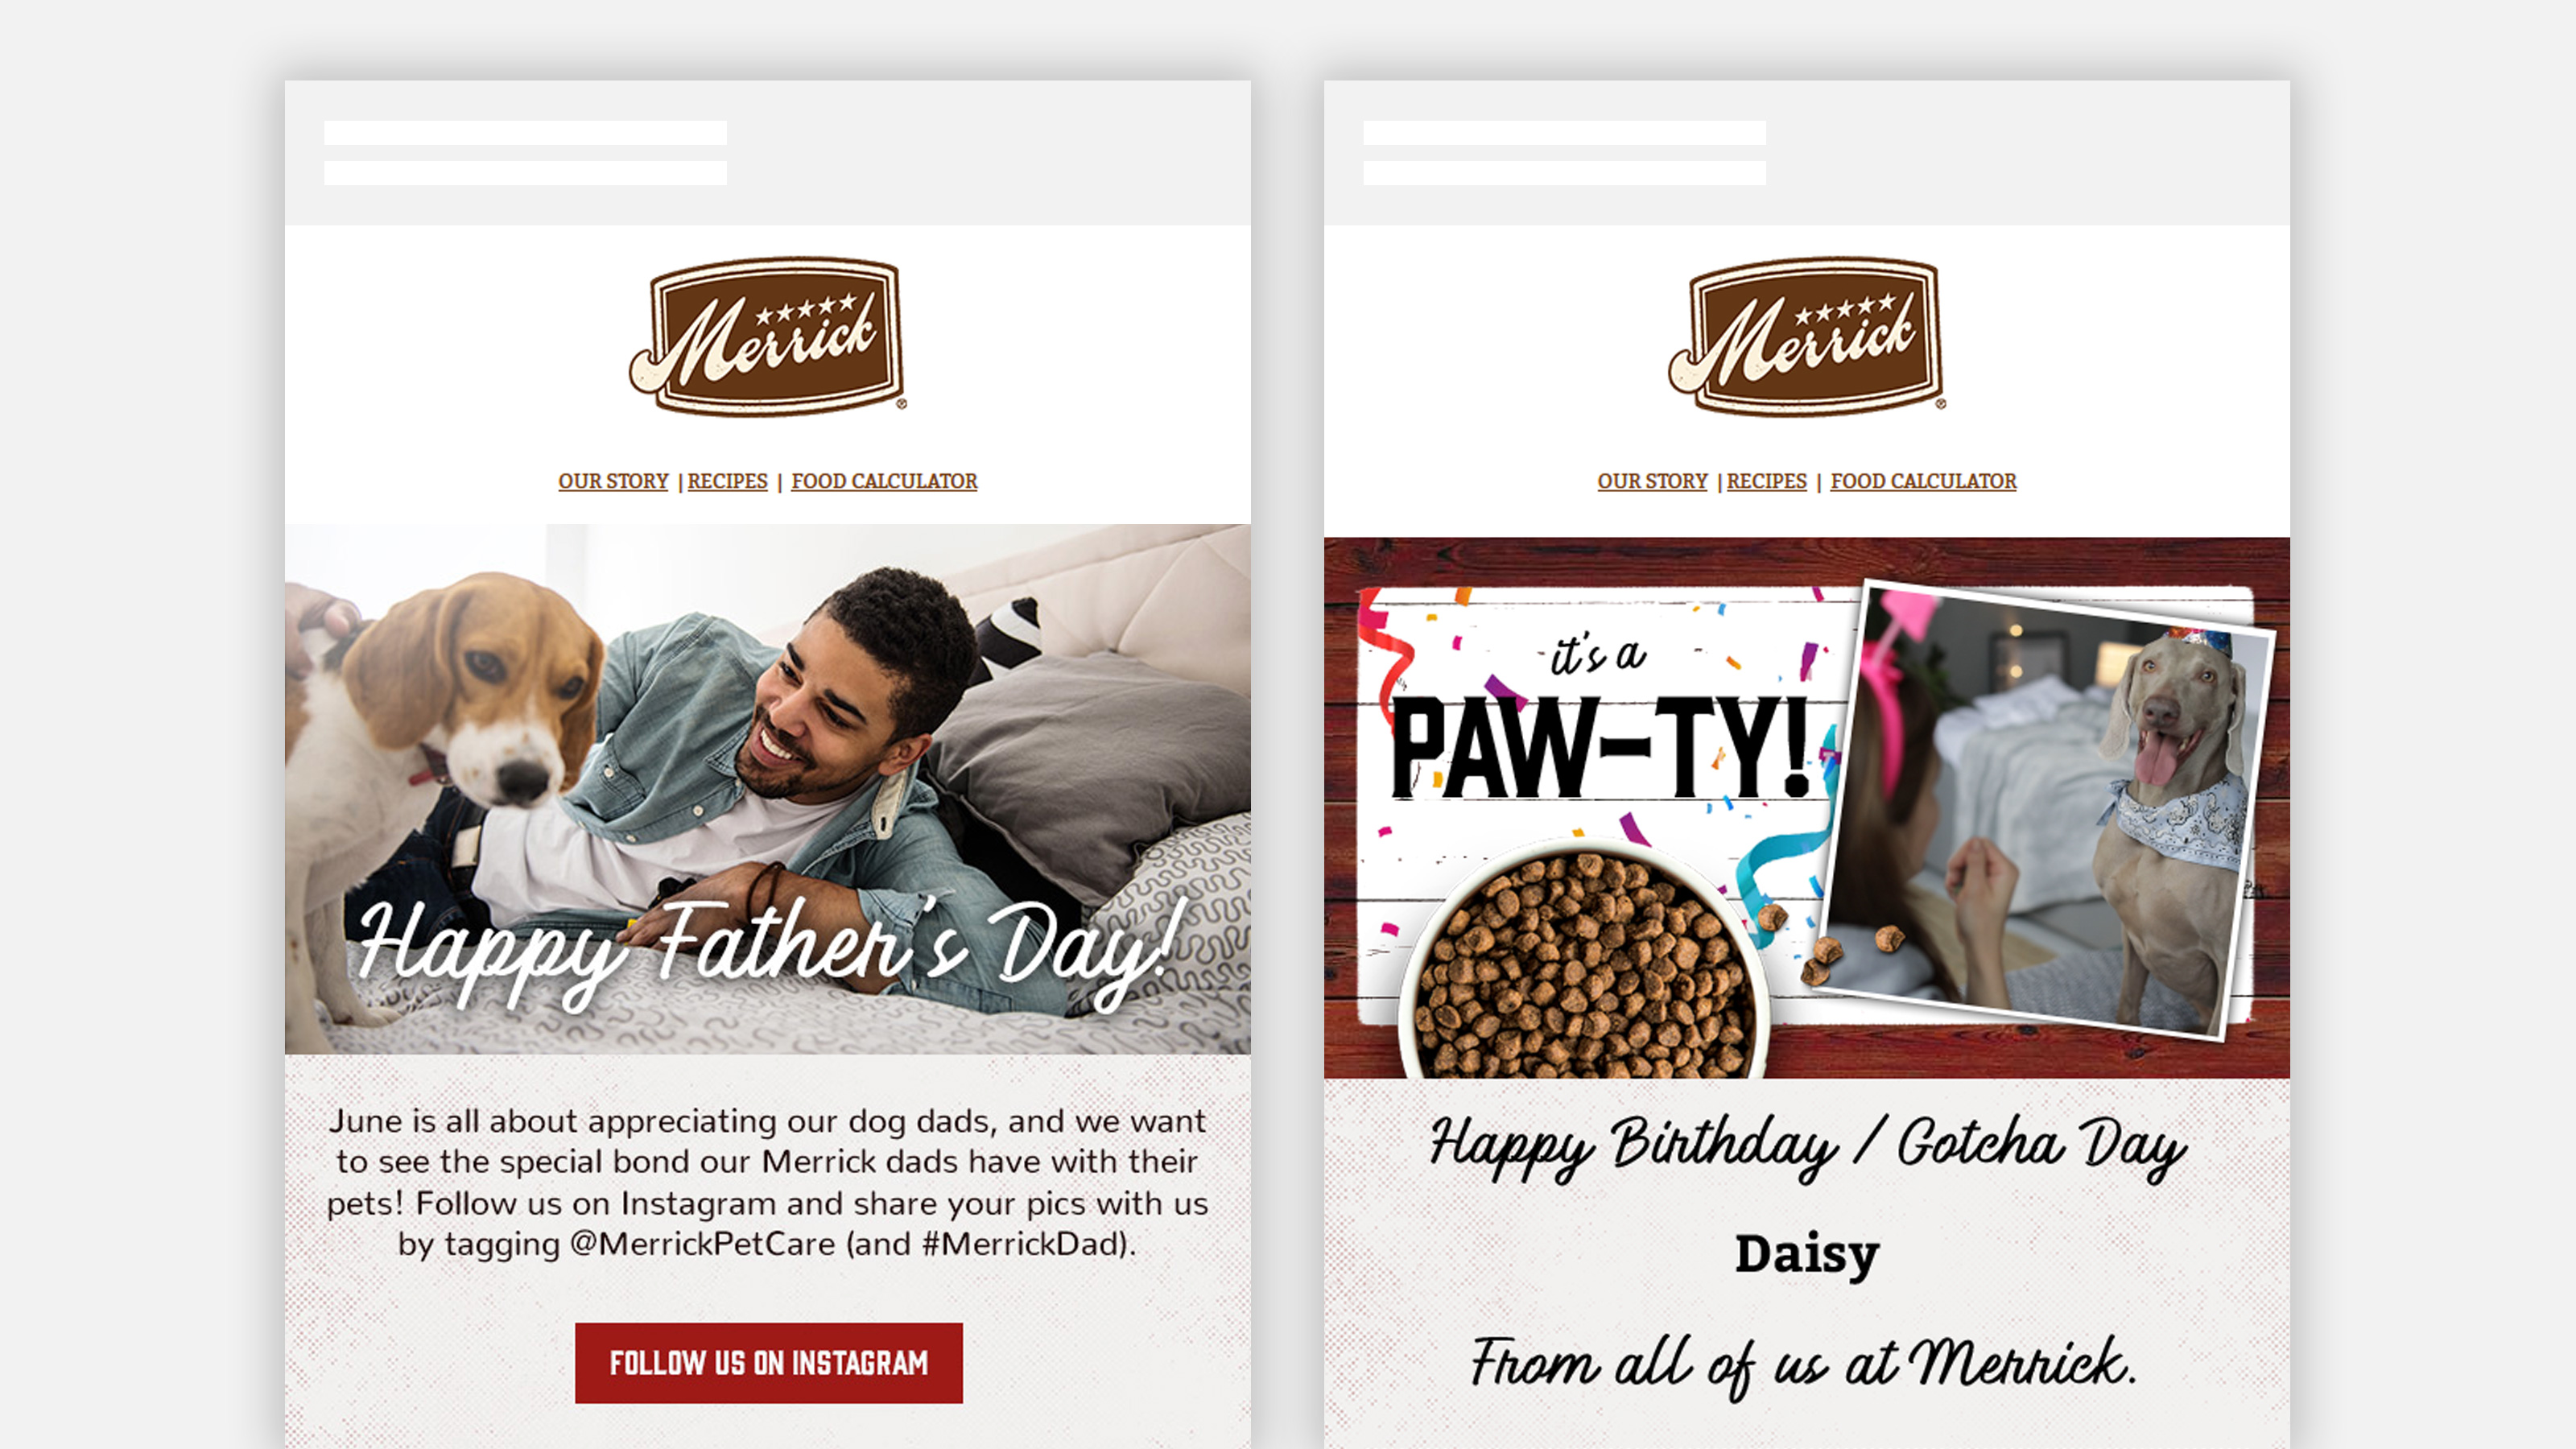 Merrick email layouts on mobile